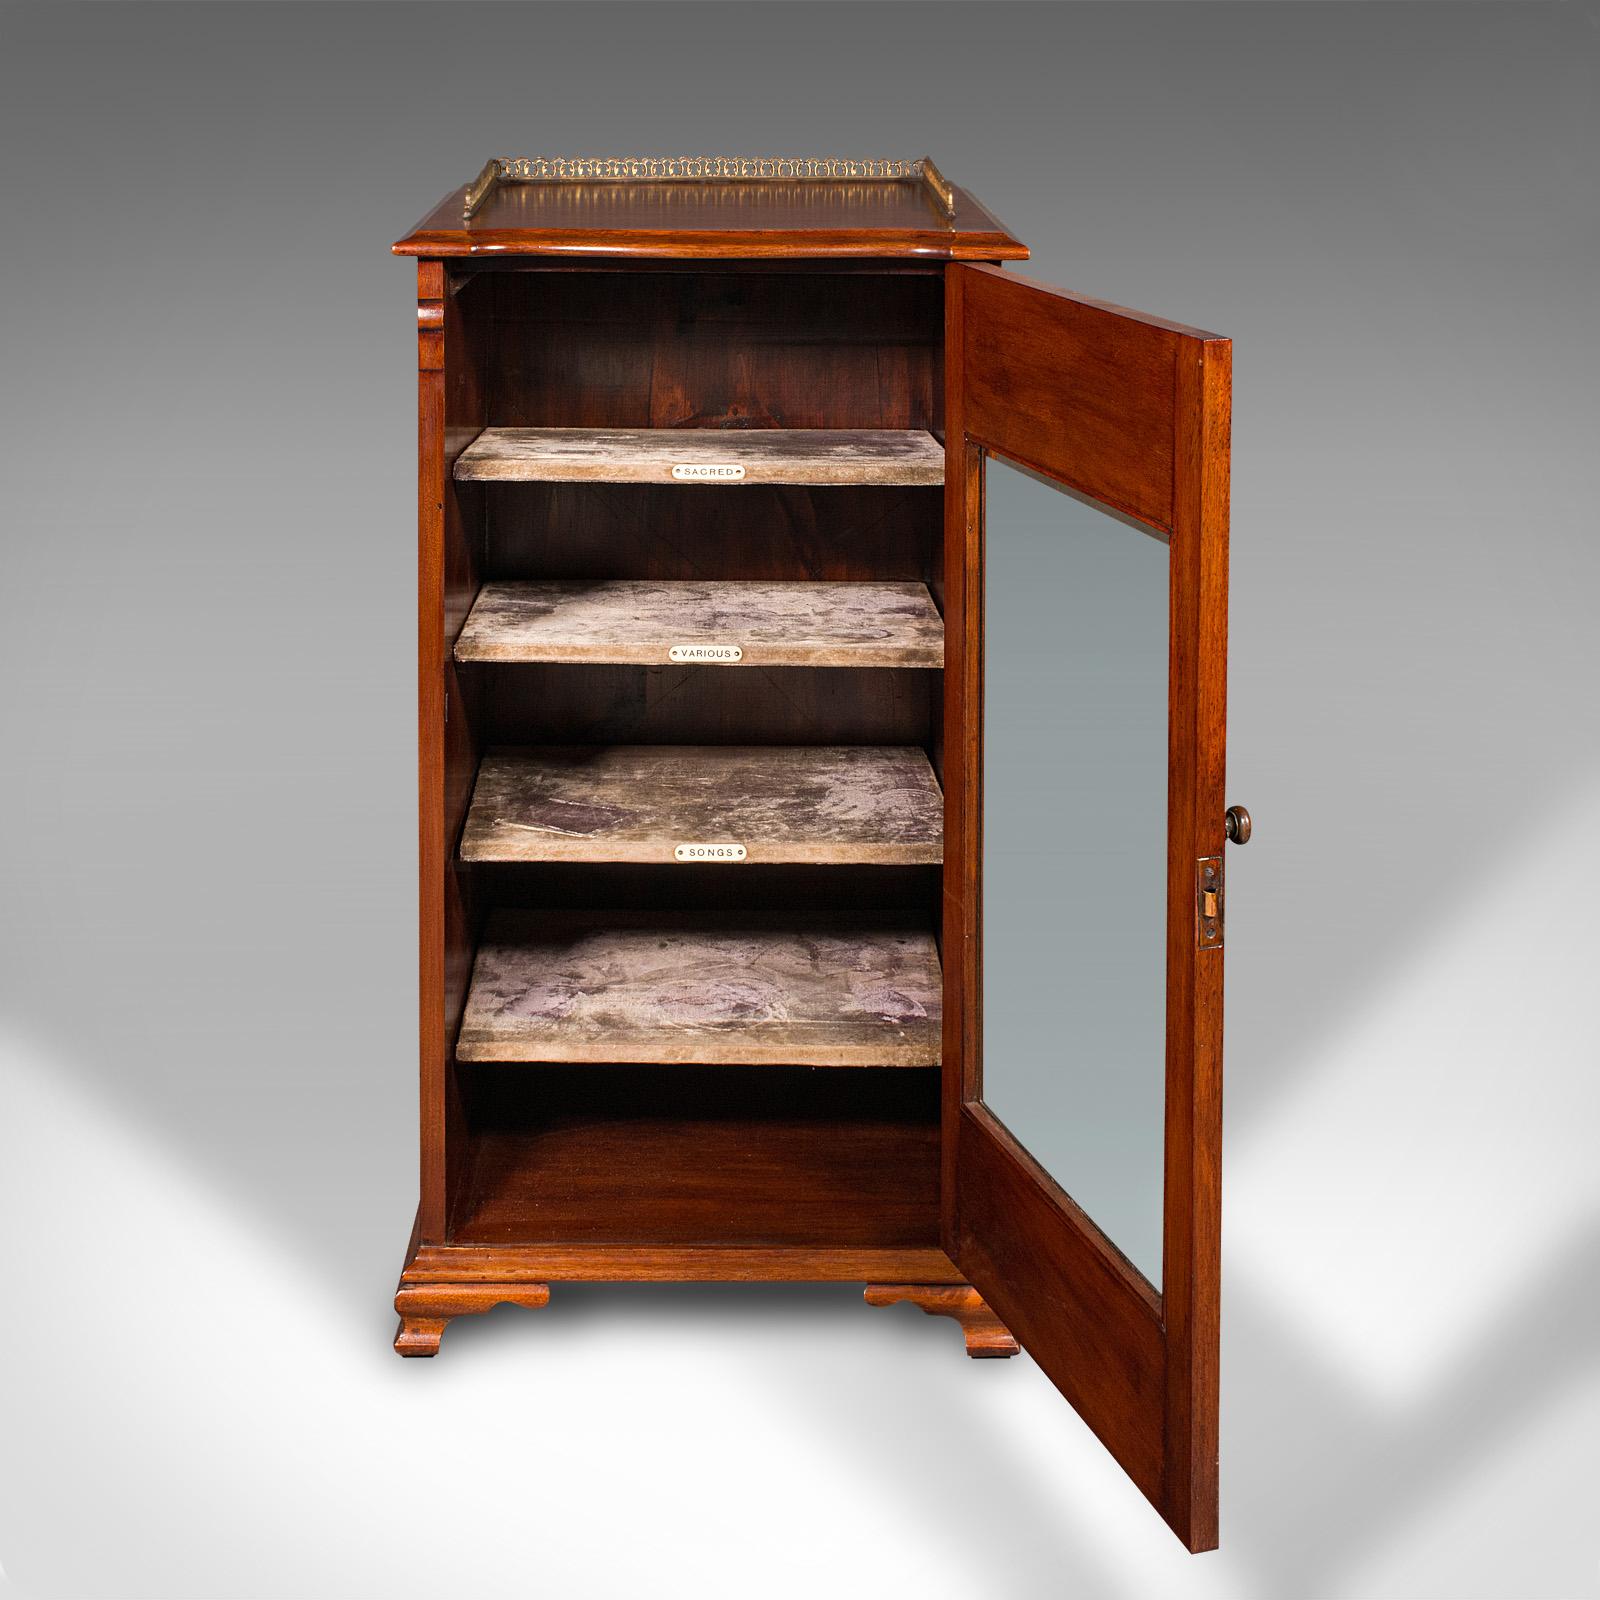 This is an antique music cabinet. An English, walnut and glass display case or bookcase, dating to the Edwardian period, circa 1910.

Of delightful quality with a highly attractive finish
Displays a desirable aged patina and in good order
Select